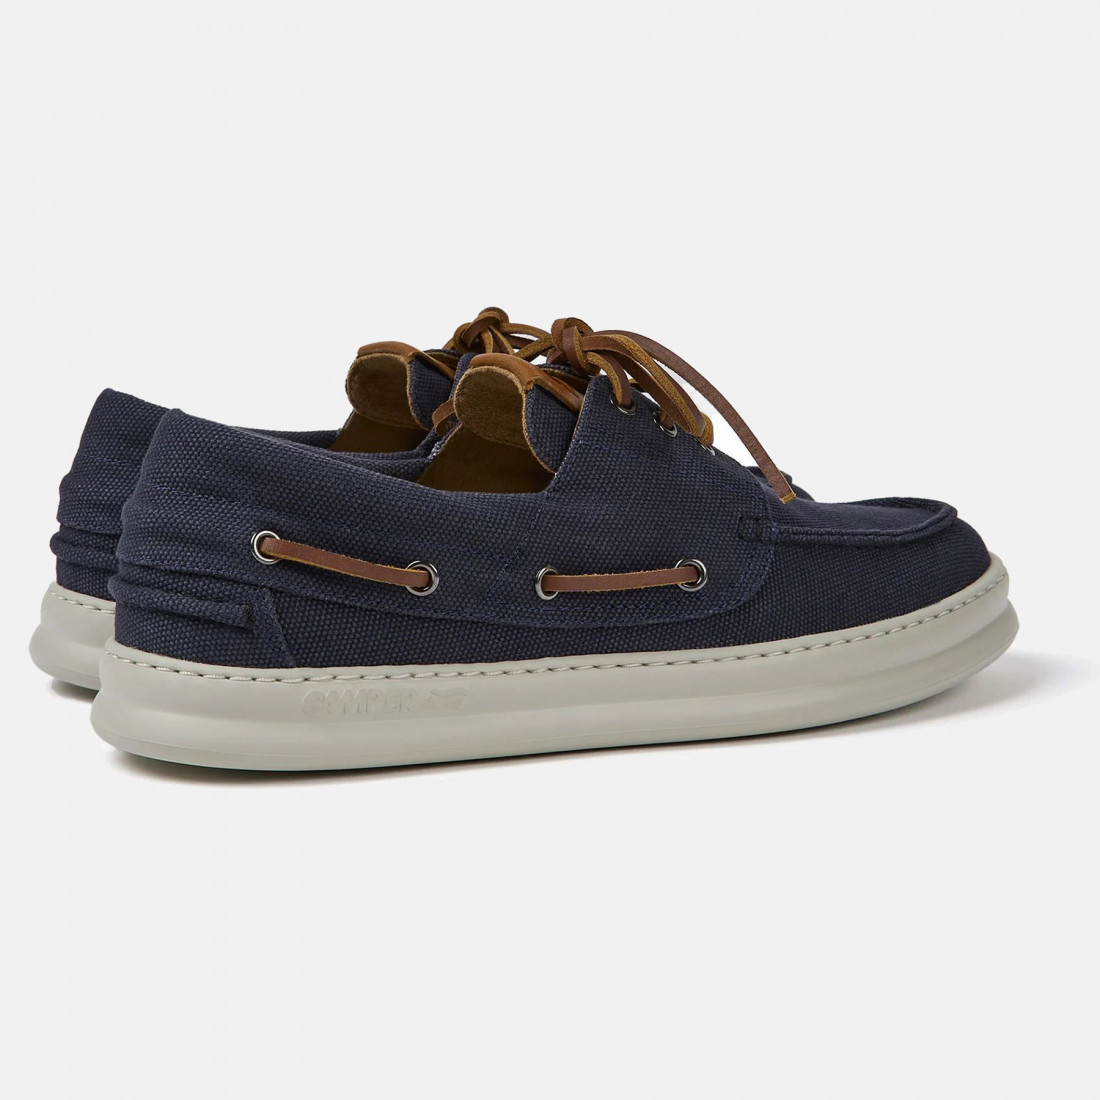 Camper Men's Boat Shoe in blue recycled cotton